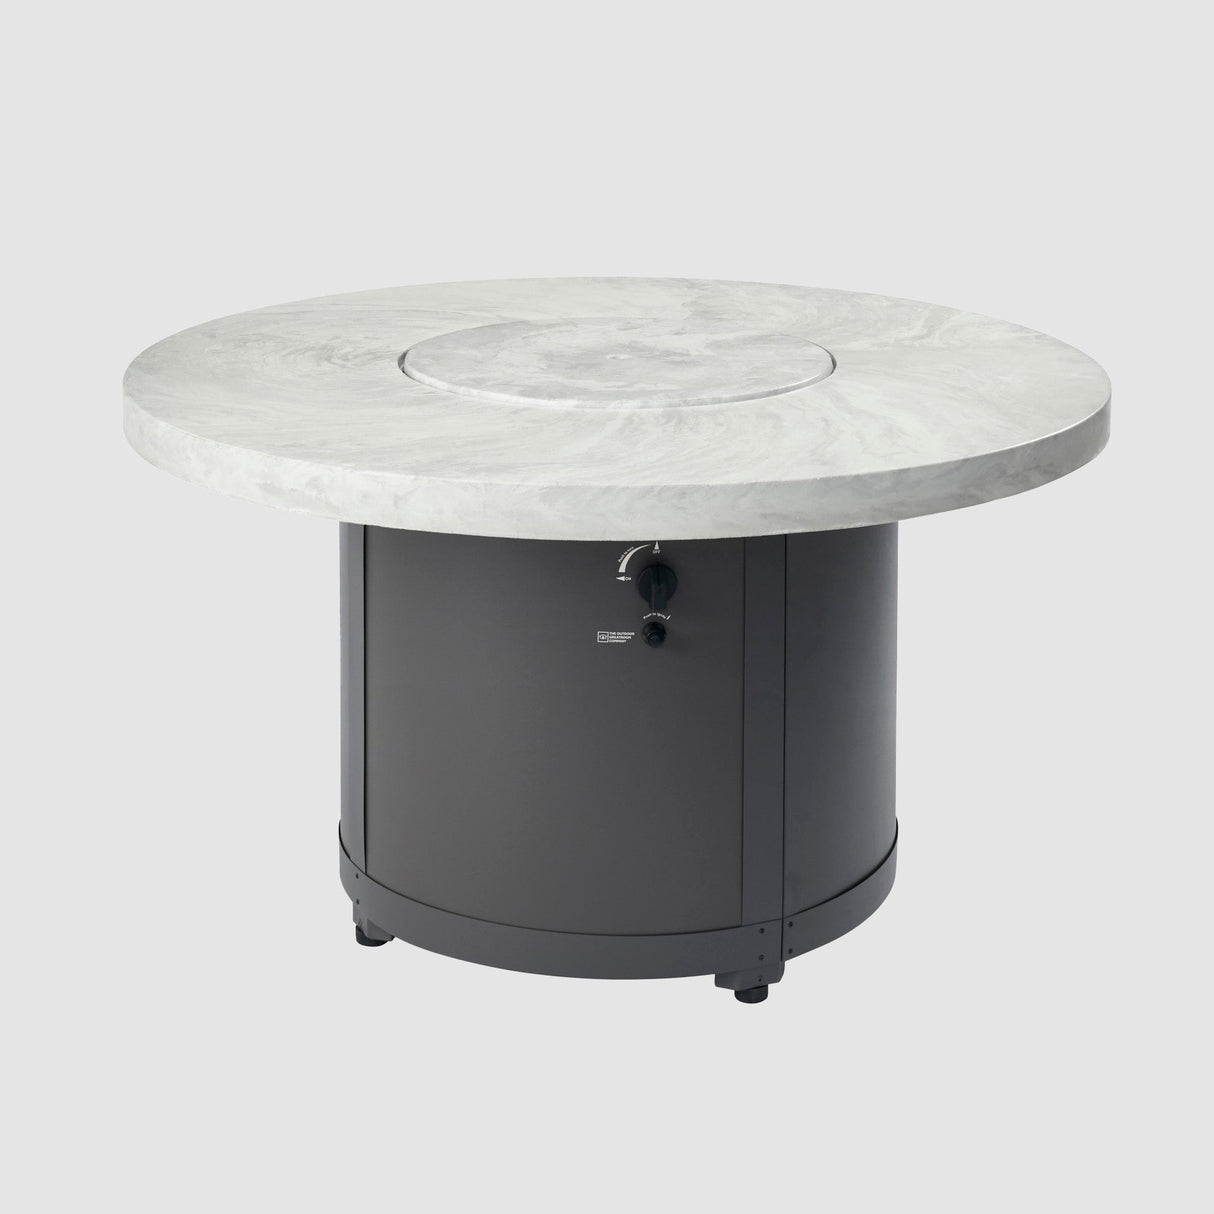 The White Onyx Beacon Round Gas Fire Pit Table with its cover on